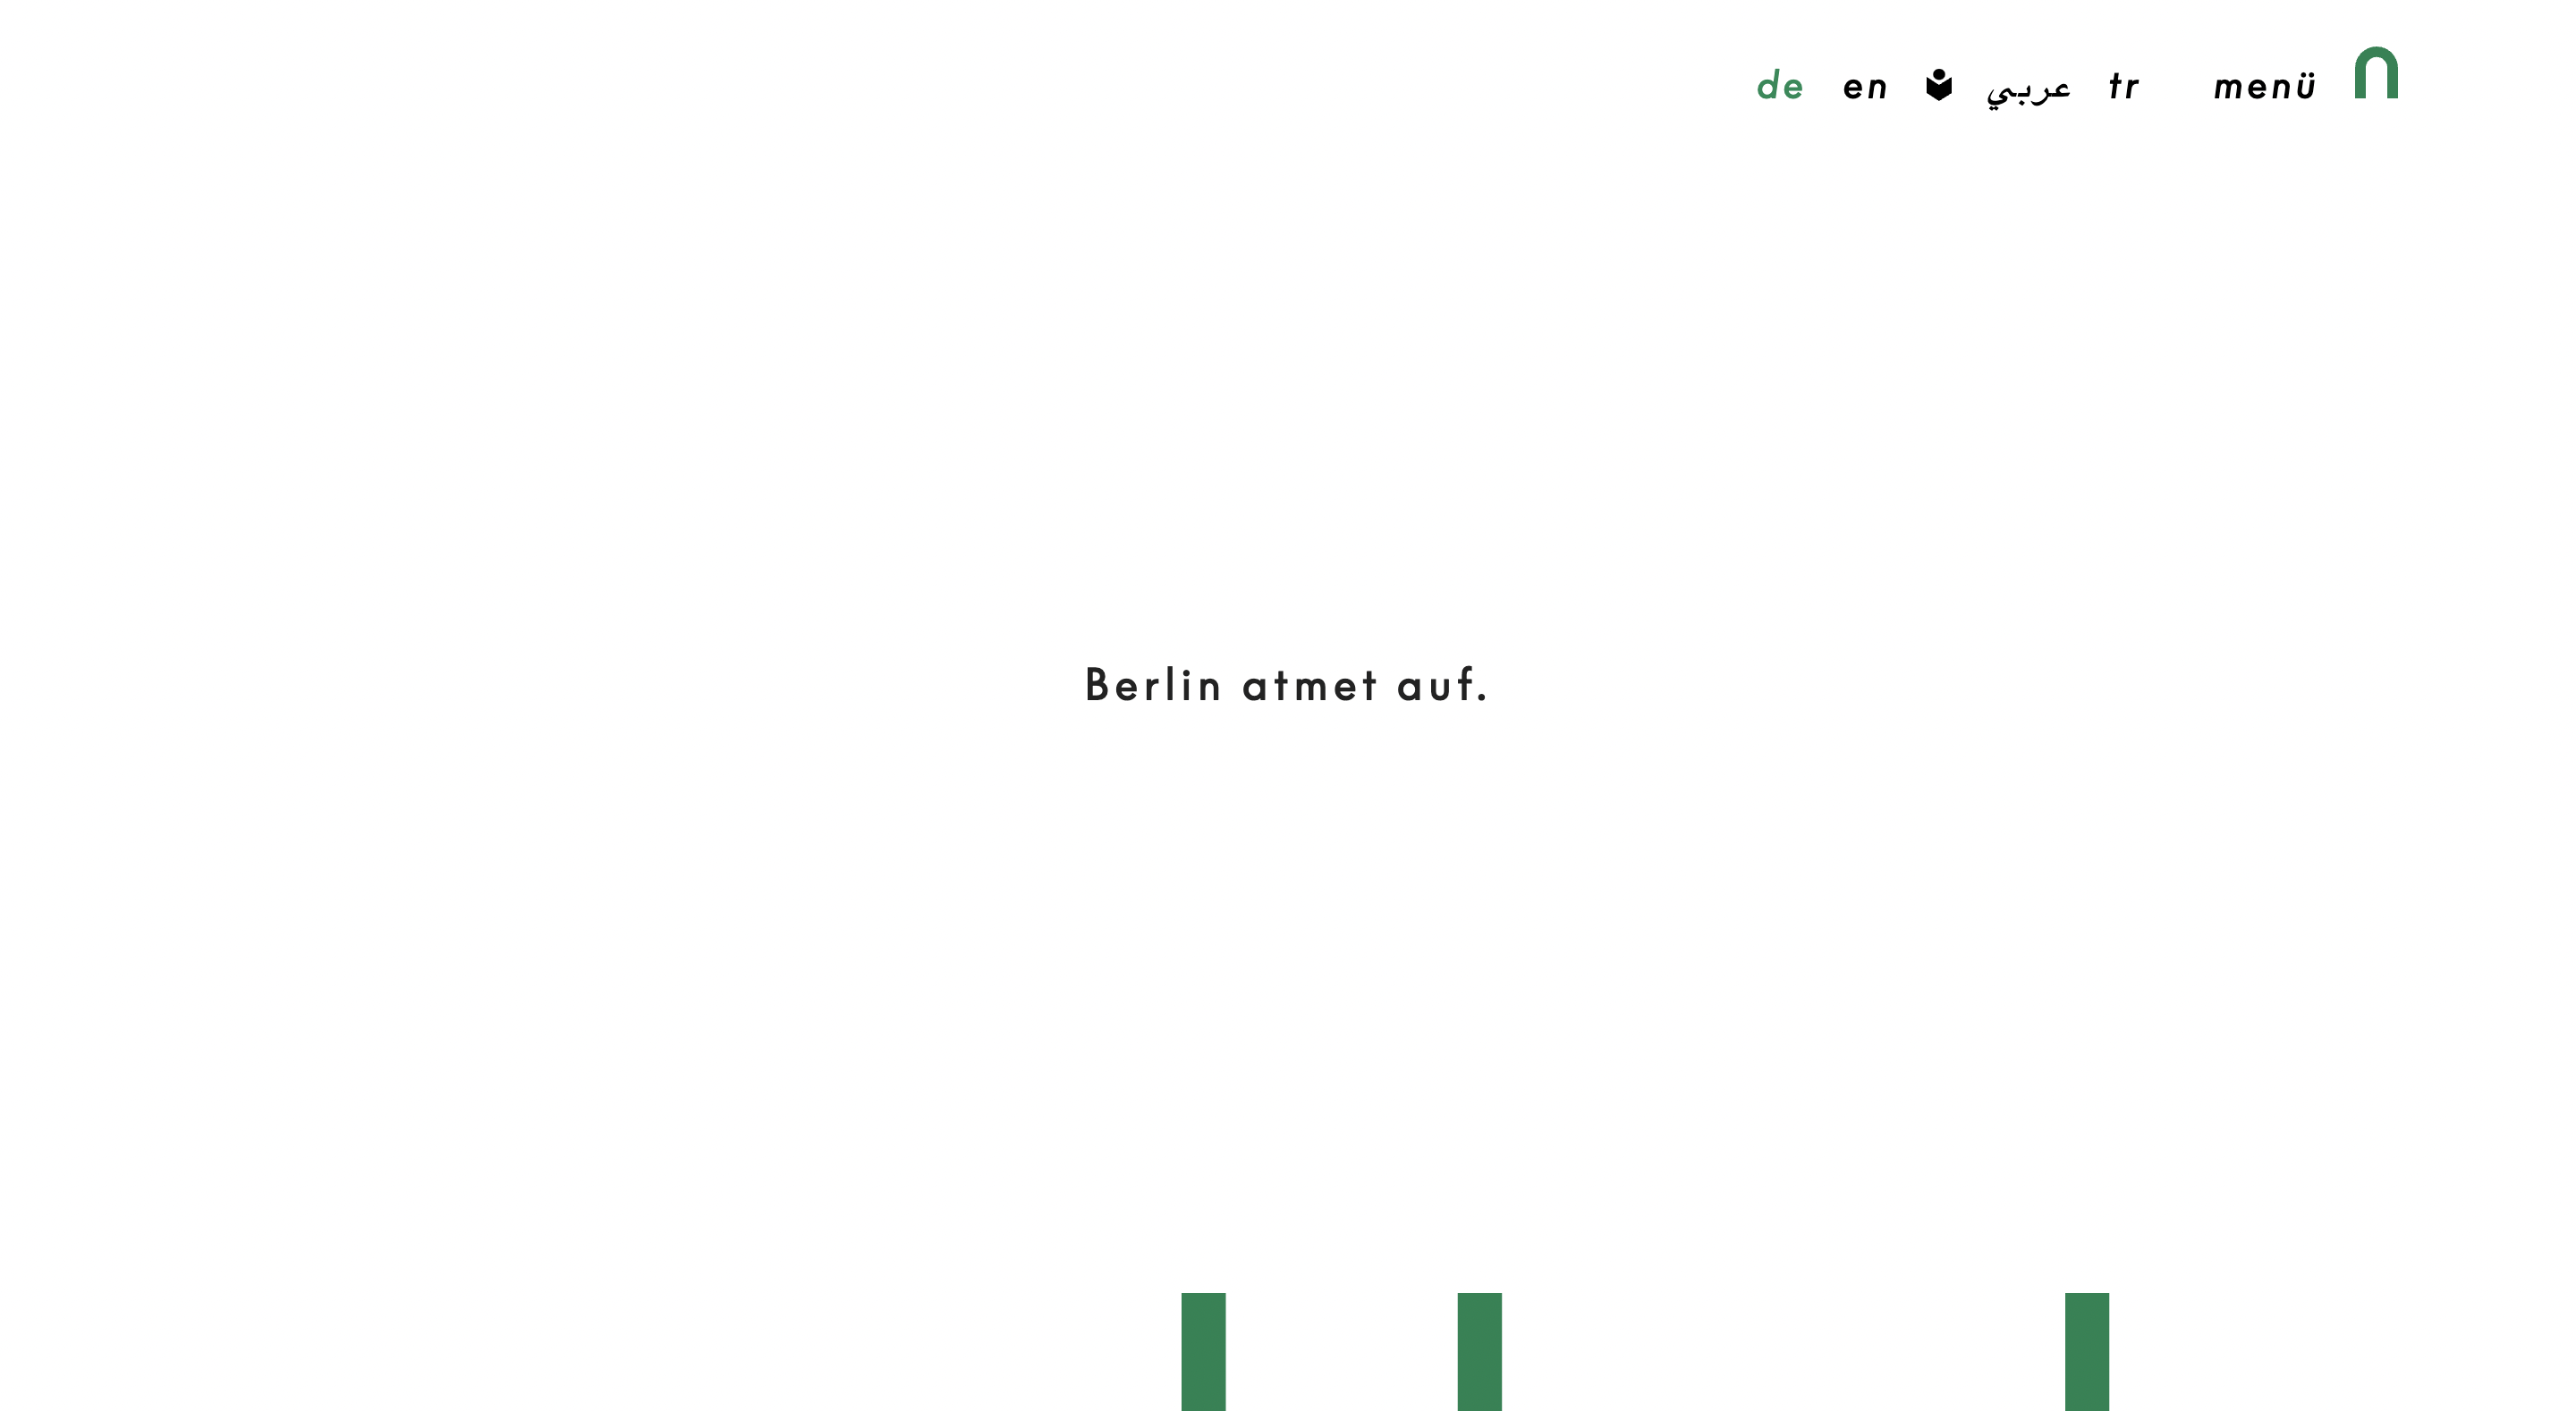 A very reduced startpage with only a tiny logo, a menu button and a language selector for multiple languages on the top right, the small german sentence for: Berlin respires in the middle and three thick green lines leaping from the bottom a little into the viewport. All on white background.